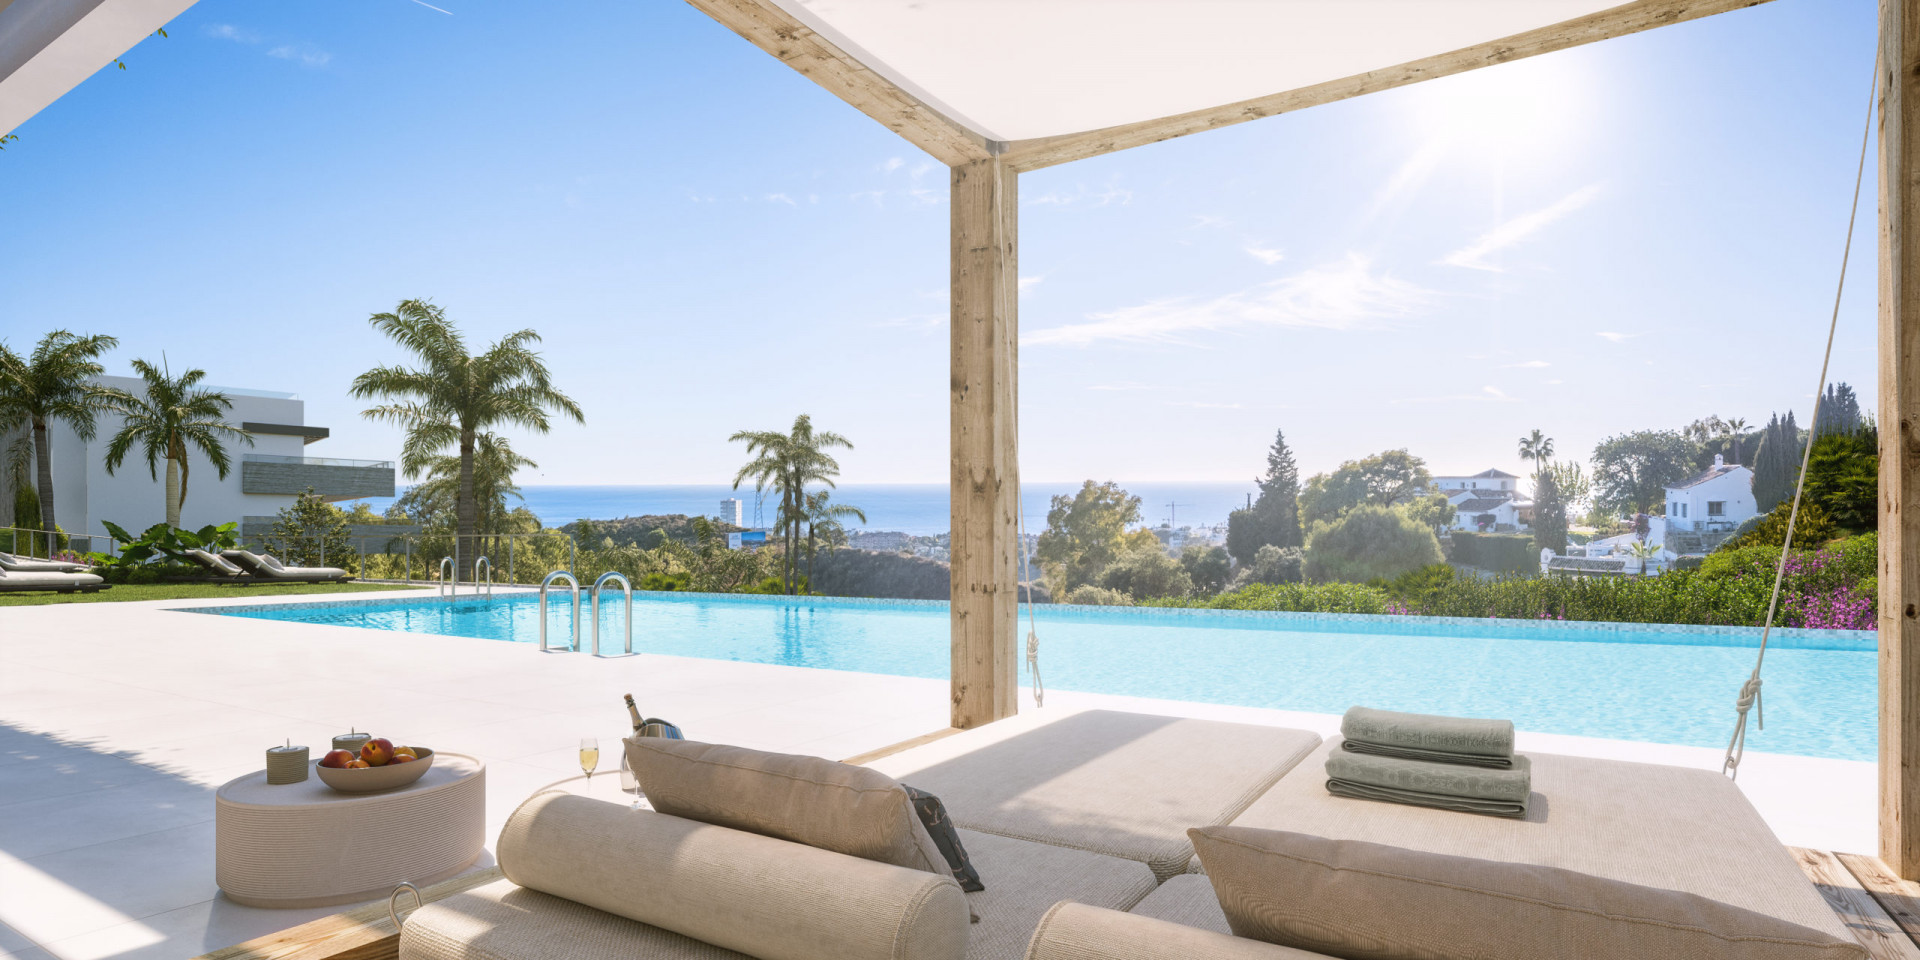 Three bedroom penthouse with solarium and panoramic views of the coastline east of Marbella. | Image 7